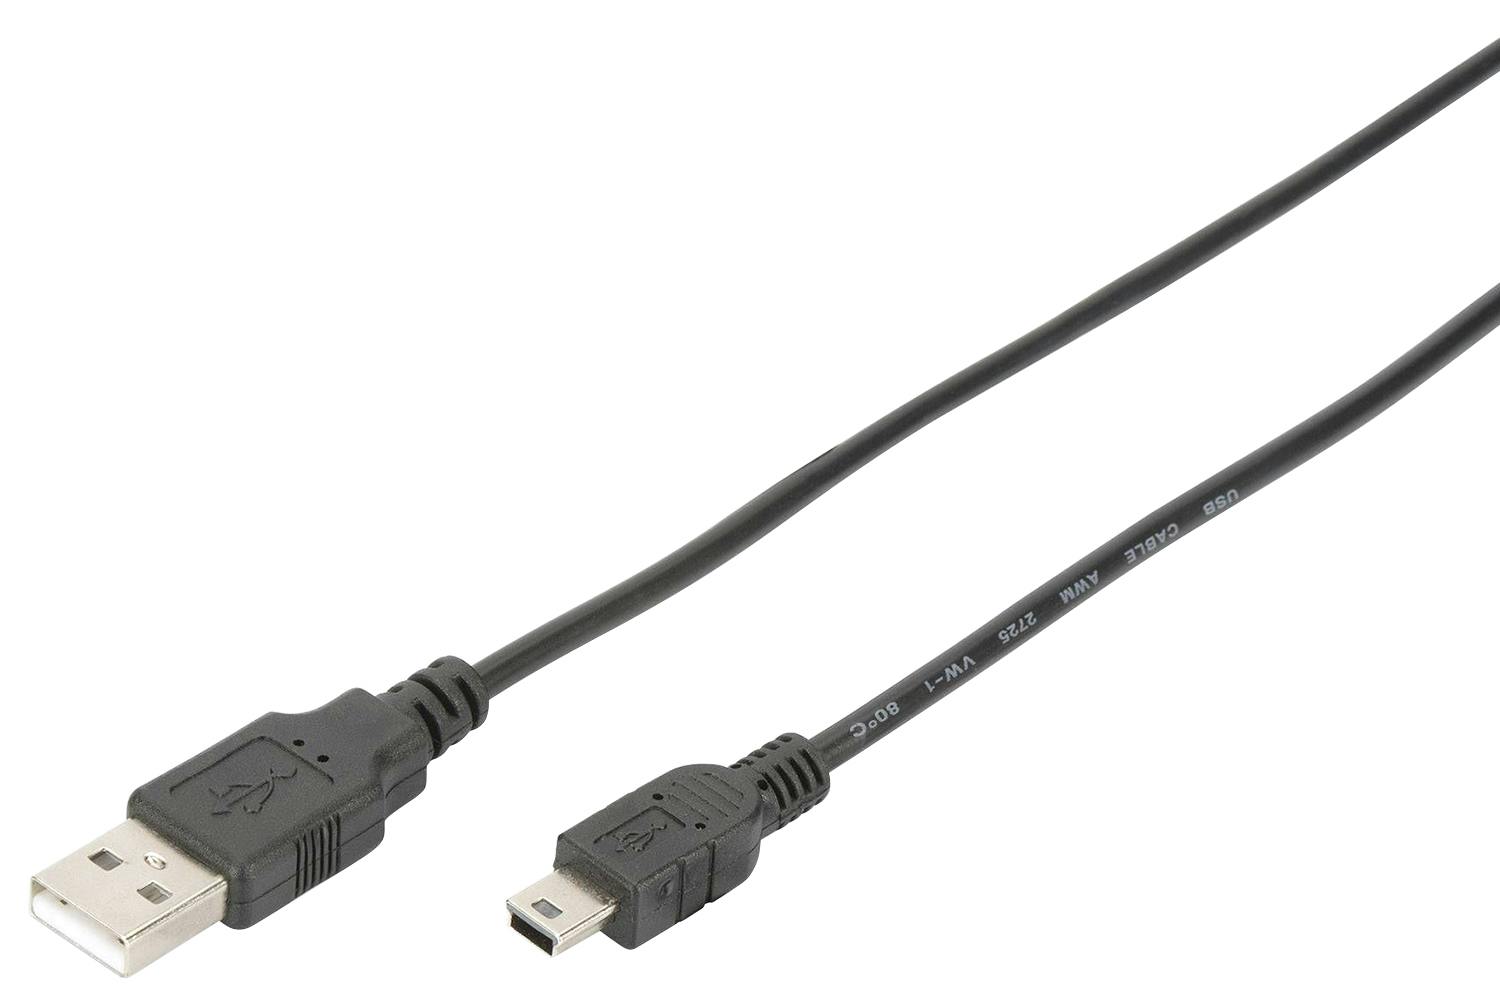 Digitus USB Type-A to Mini-B Connection Cable | Black